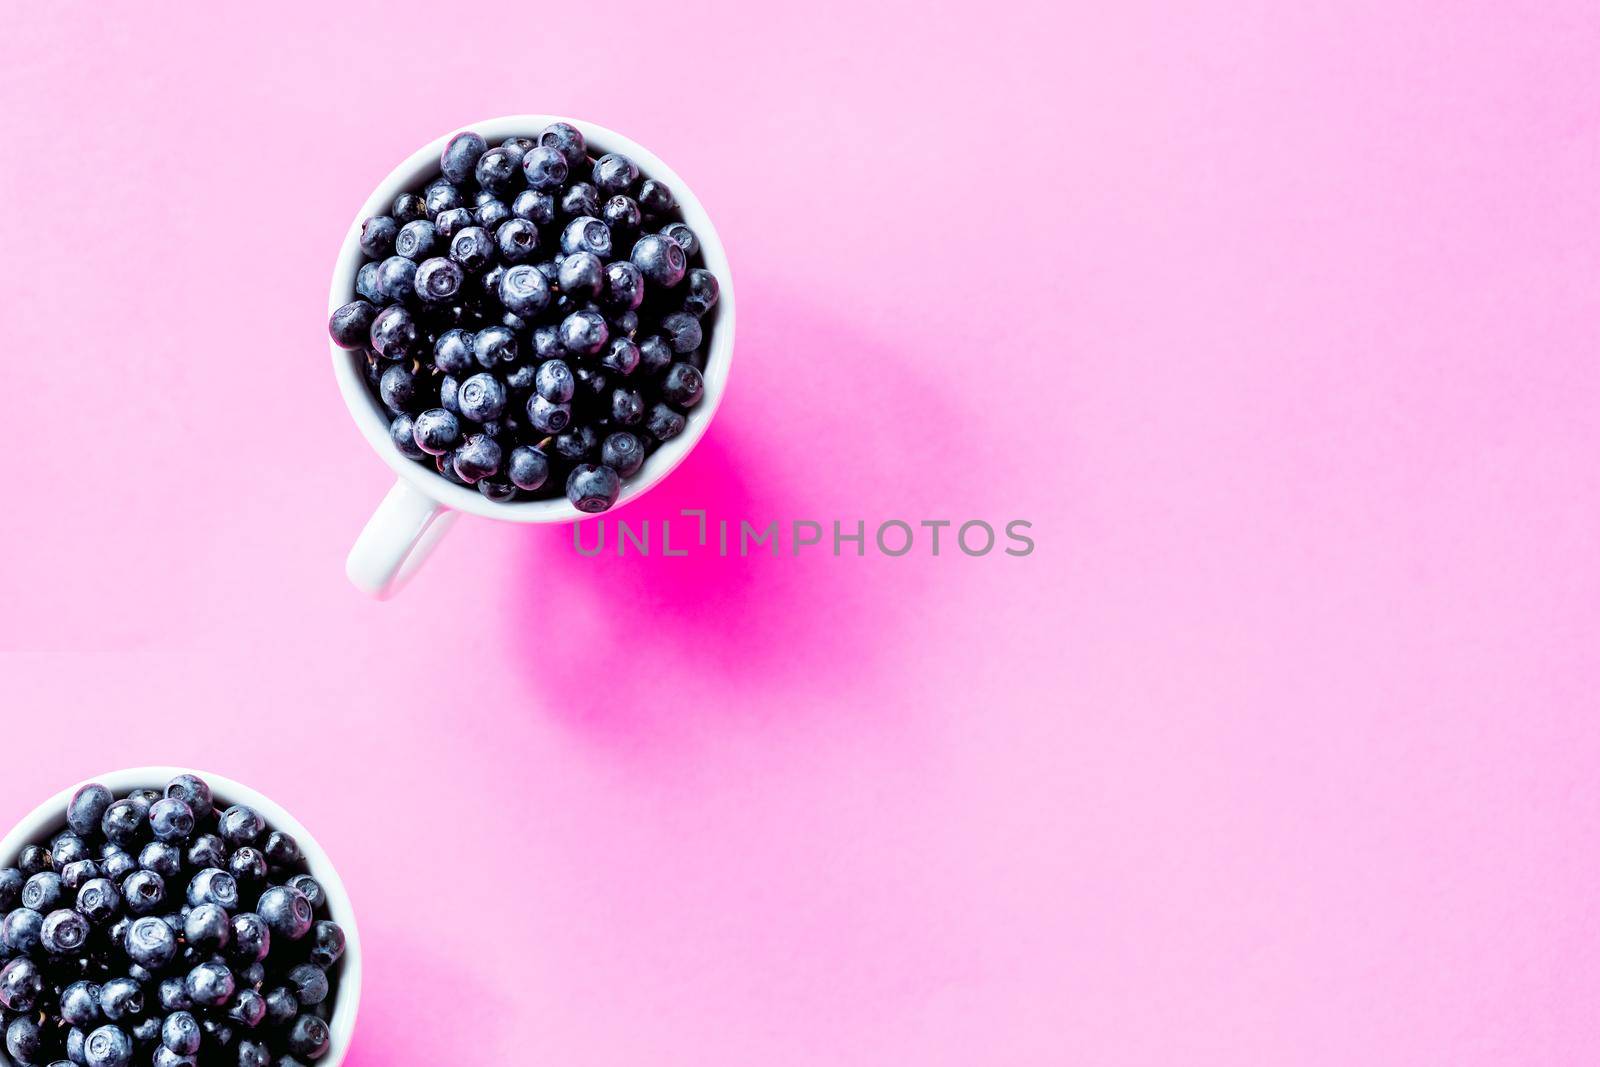 Art Nouveau style concept image, White cup full of blueberries on a colored geometric trendy background, food and healthy concept